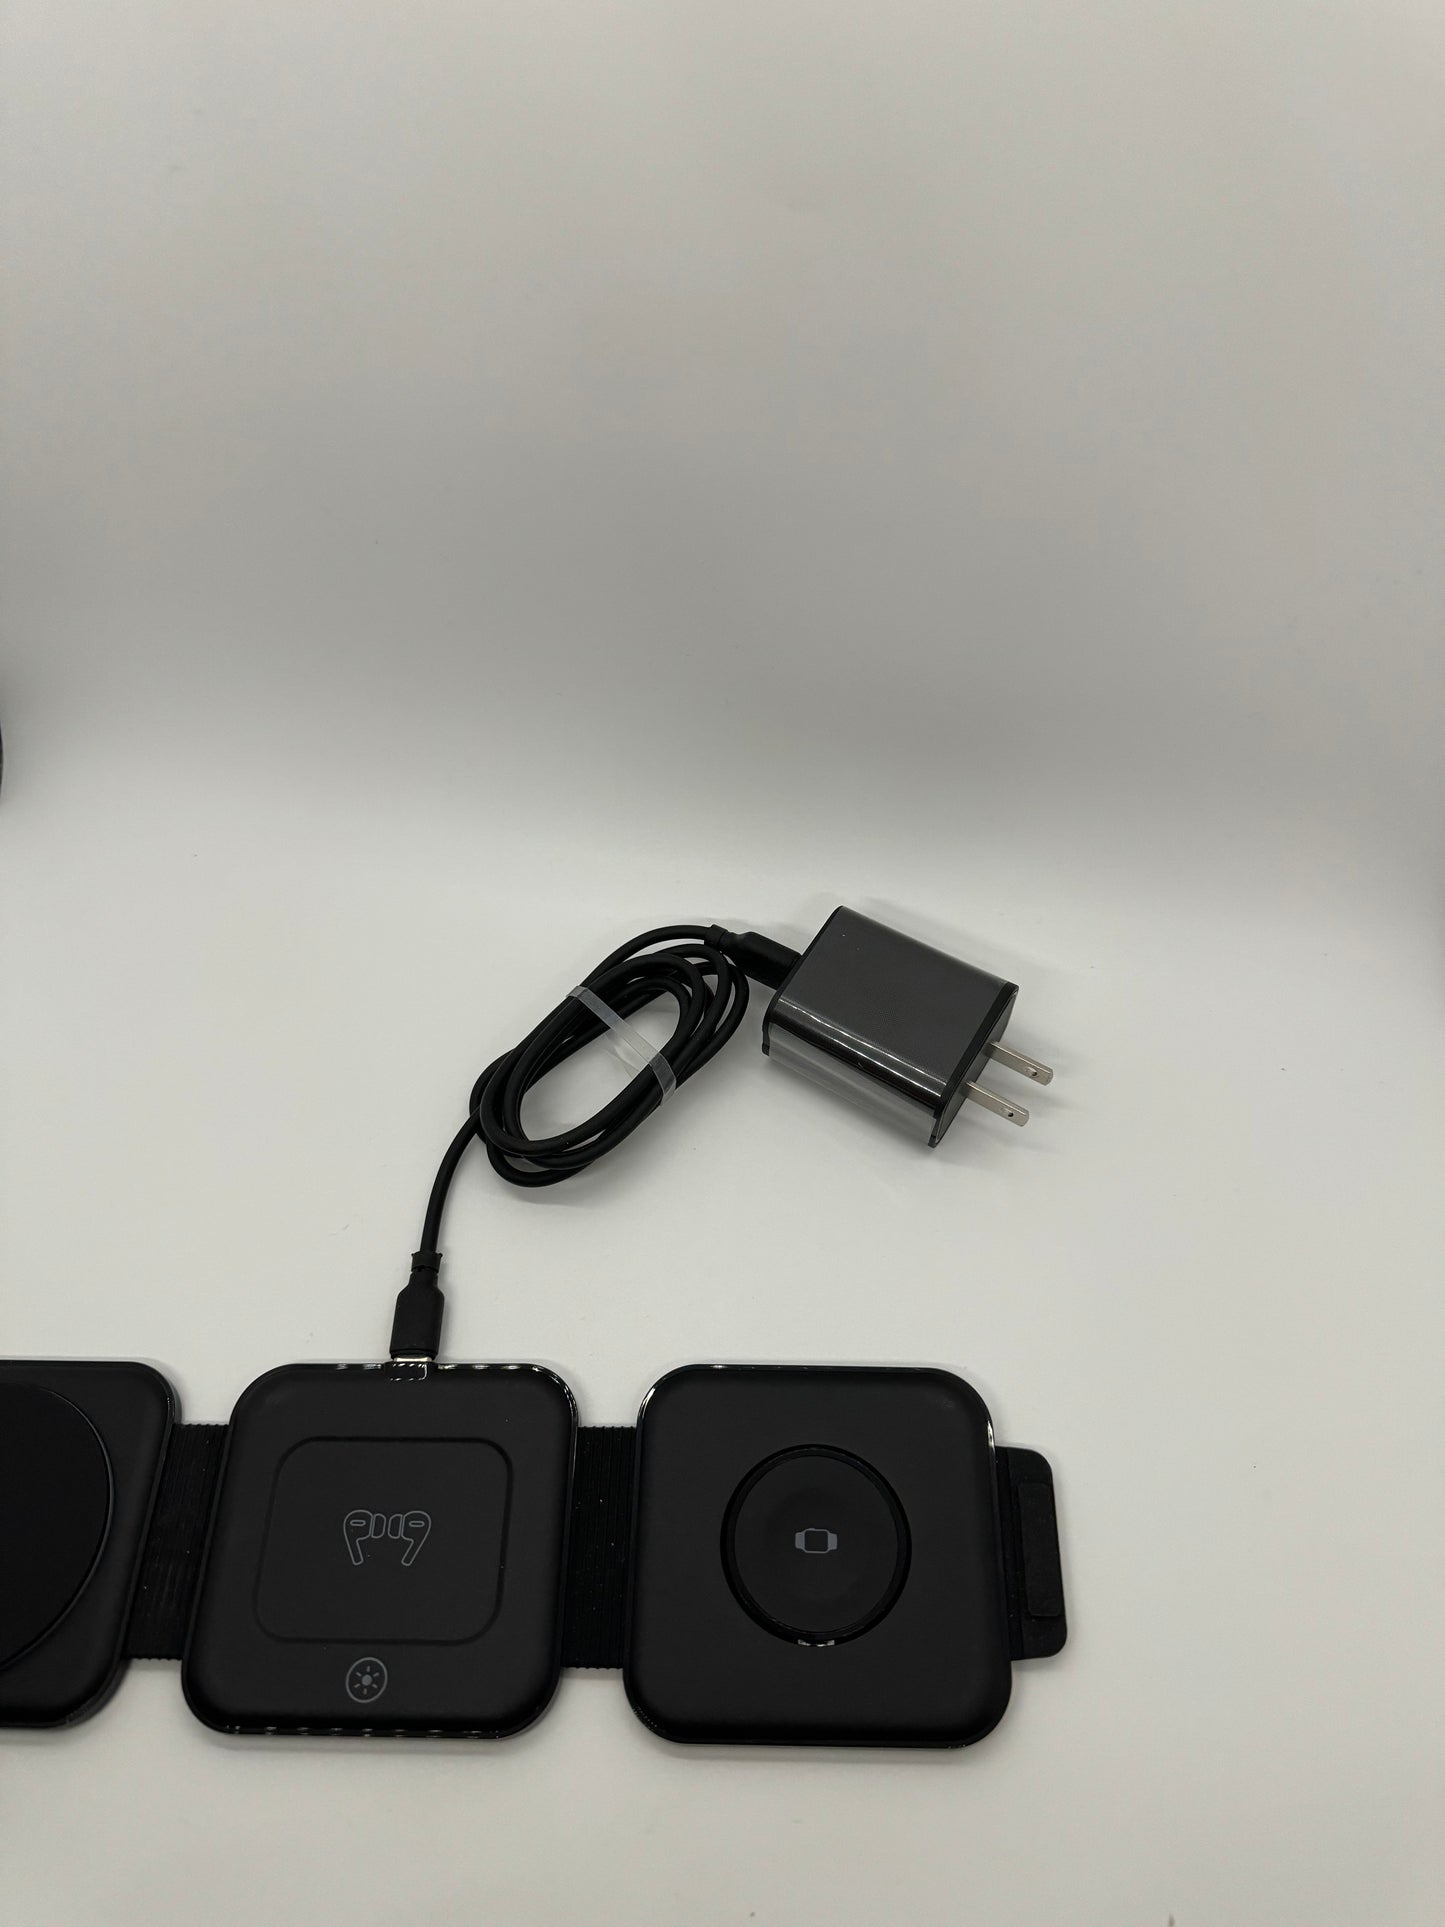 The picture shows three black square devices lying next to each other on a white surface. The device in the middle has a cable attached to it. Above the devices, there is a black power adapter with a two-prong plug and a cable wrapped around it. The device on the left has a circular indentation in the center. The middle device has a logo that looks like a dog's face and a small circular button below the logo. The device on the right has a circular shape in the center with a small square inside i